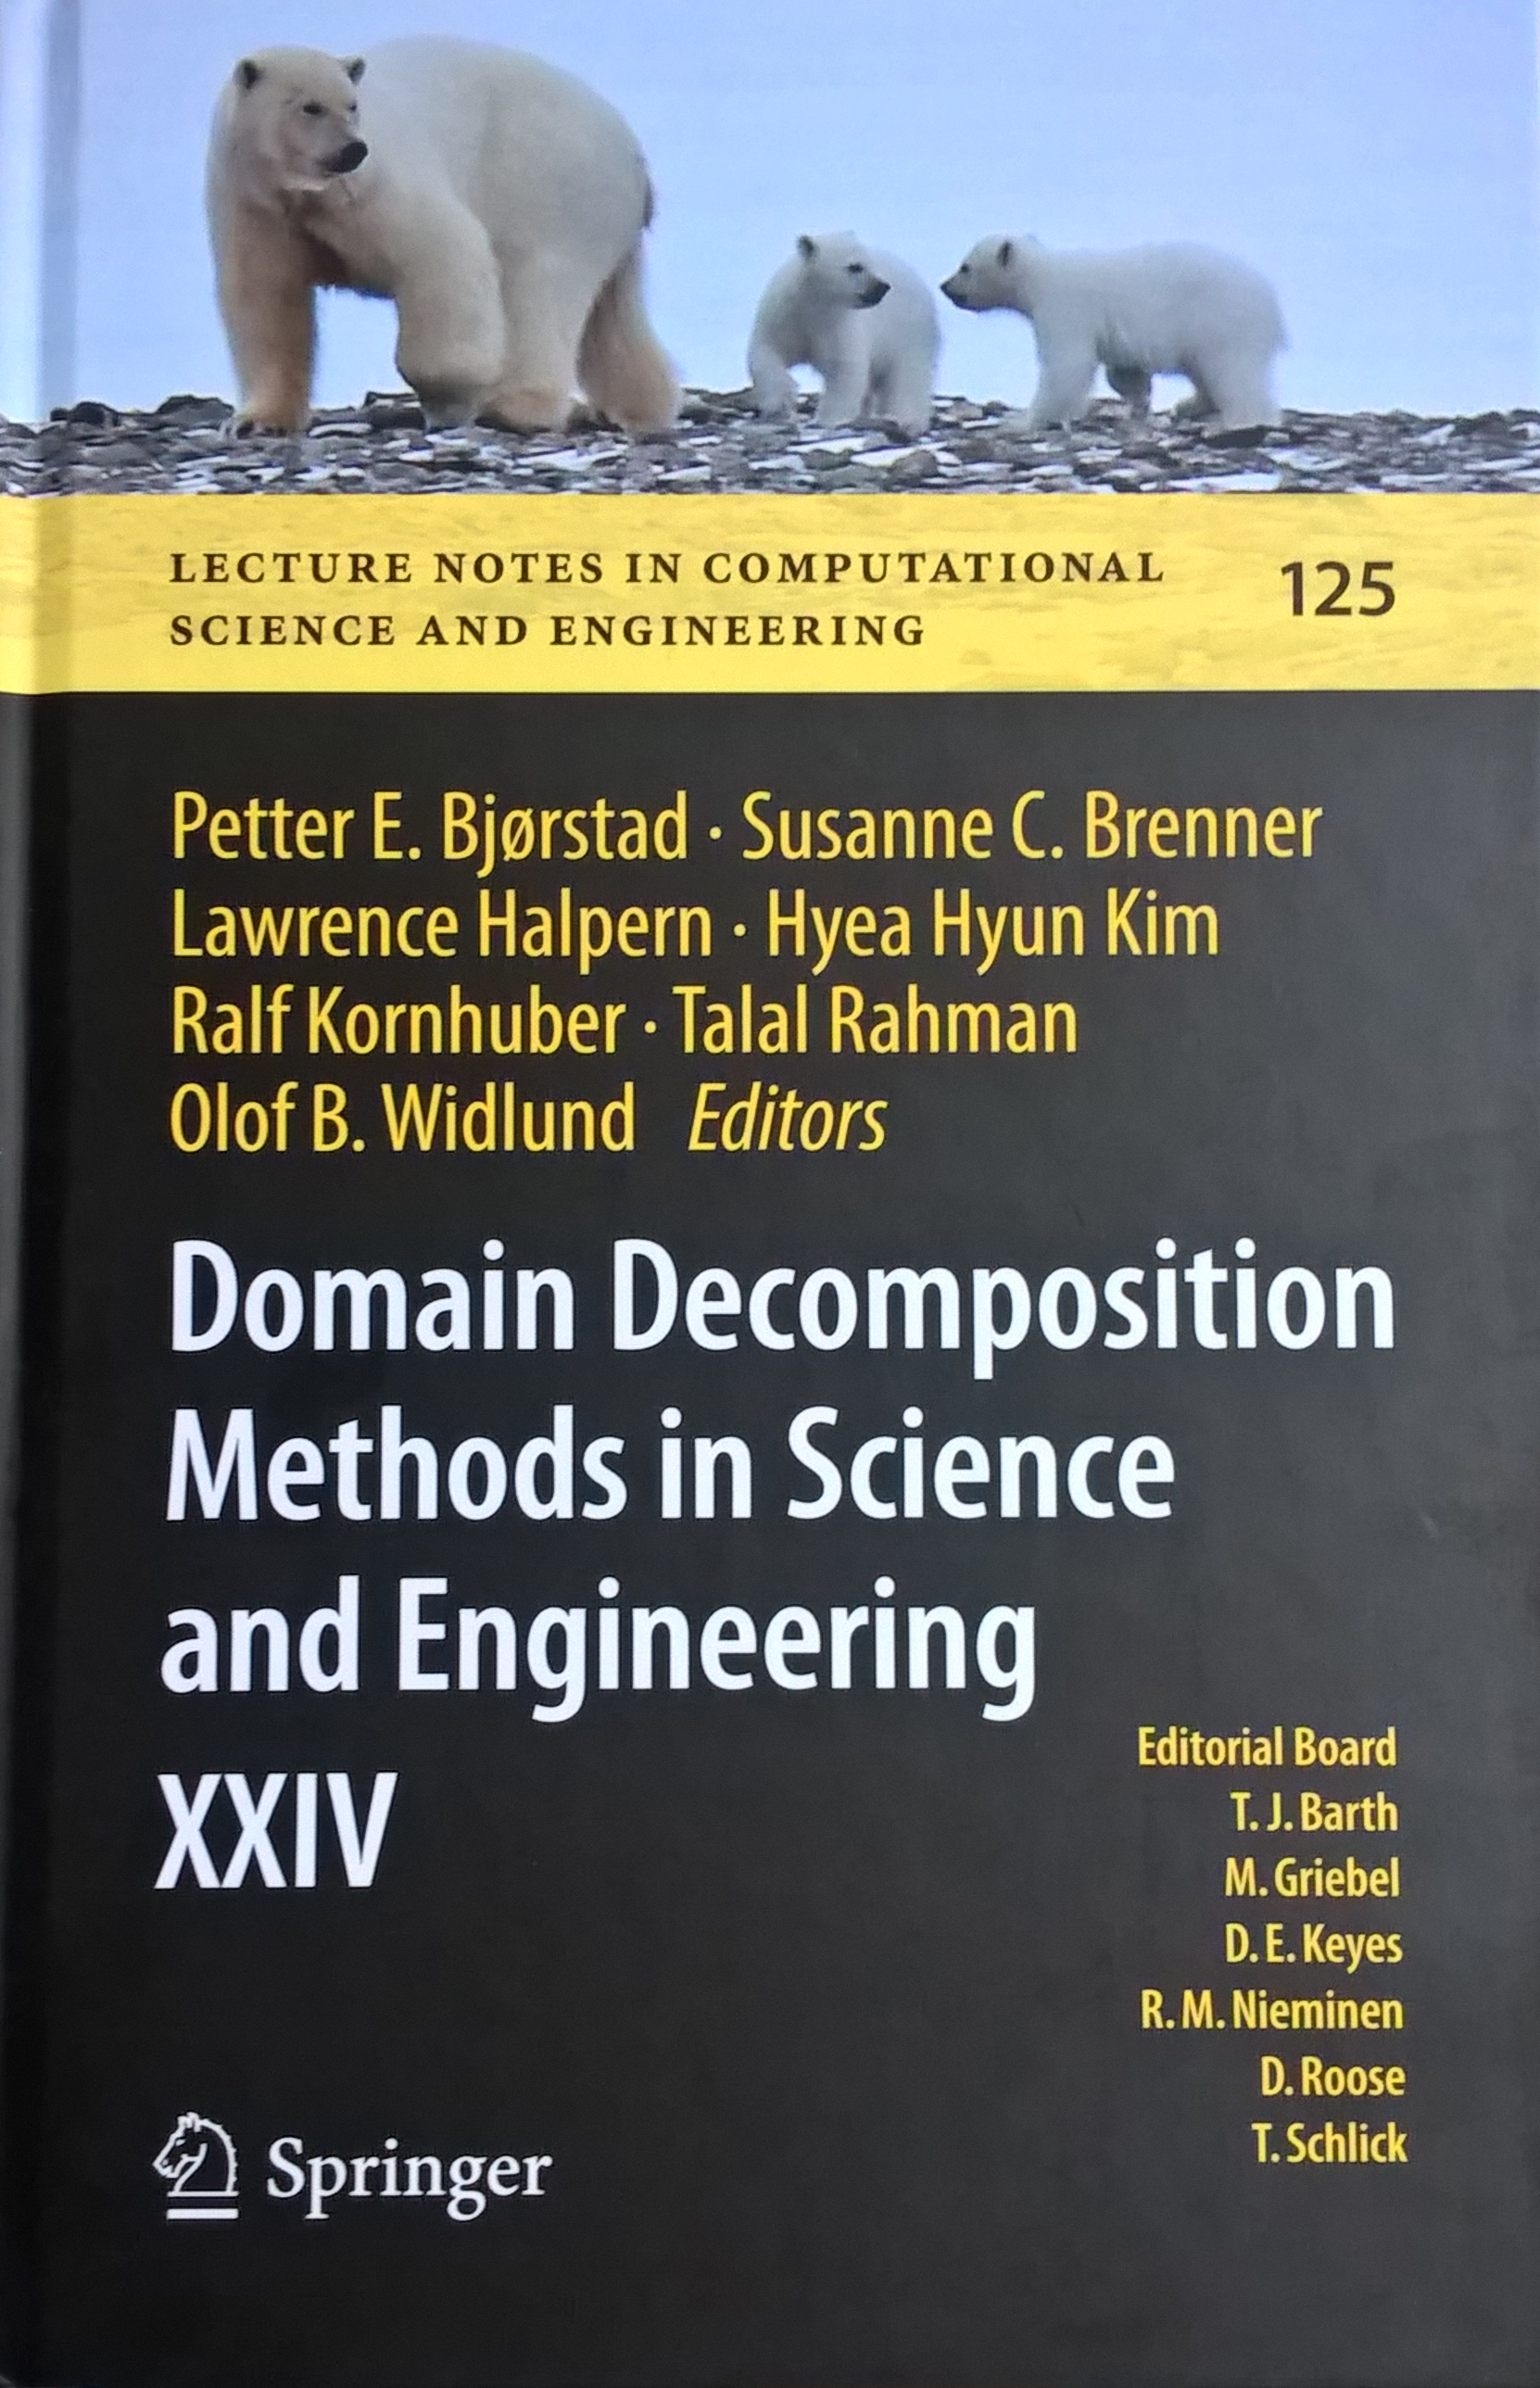 Domain Decomposition Methods in Science and Engineering XXIV, Titelseite